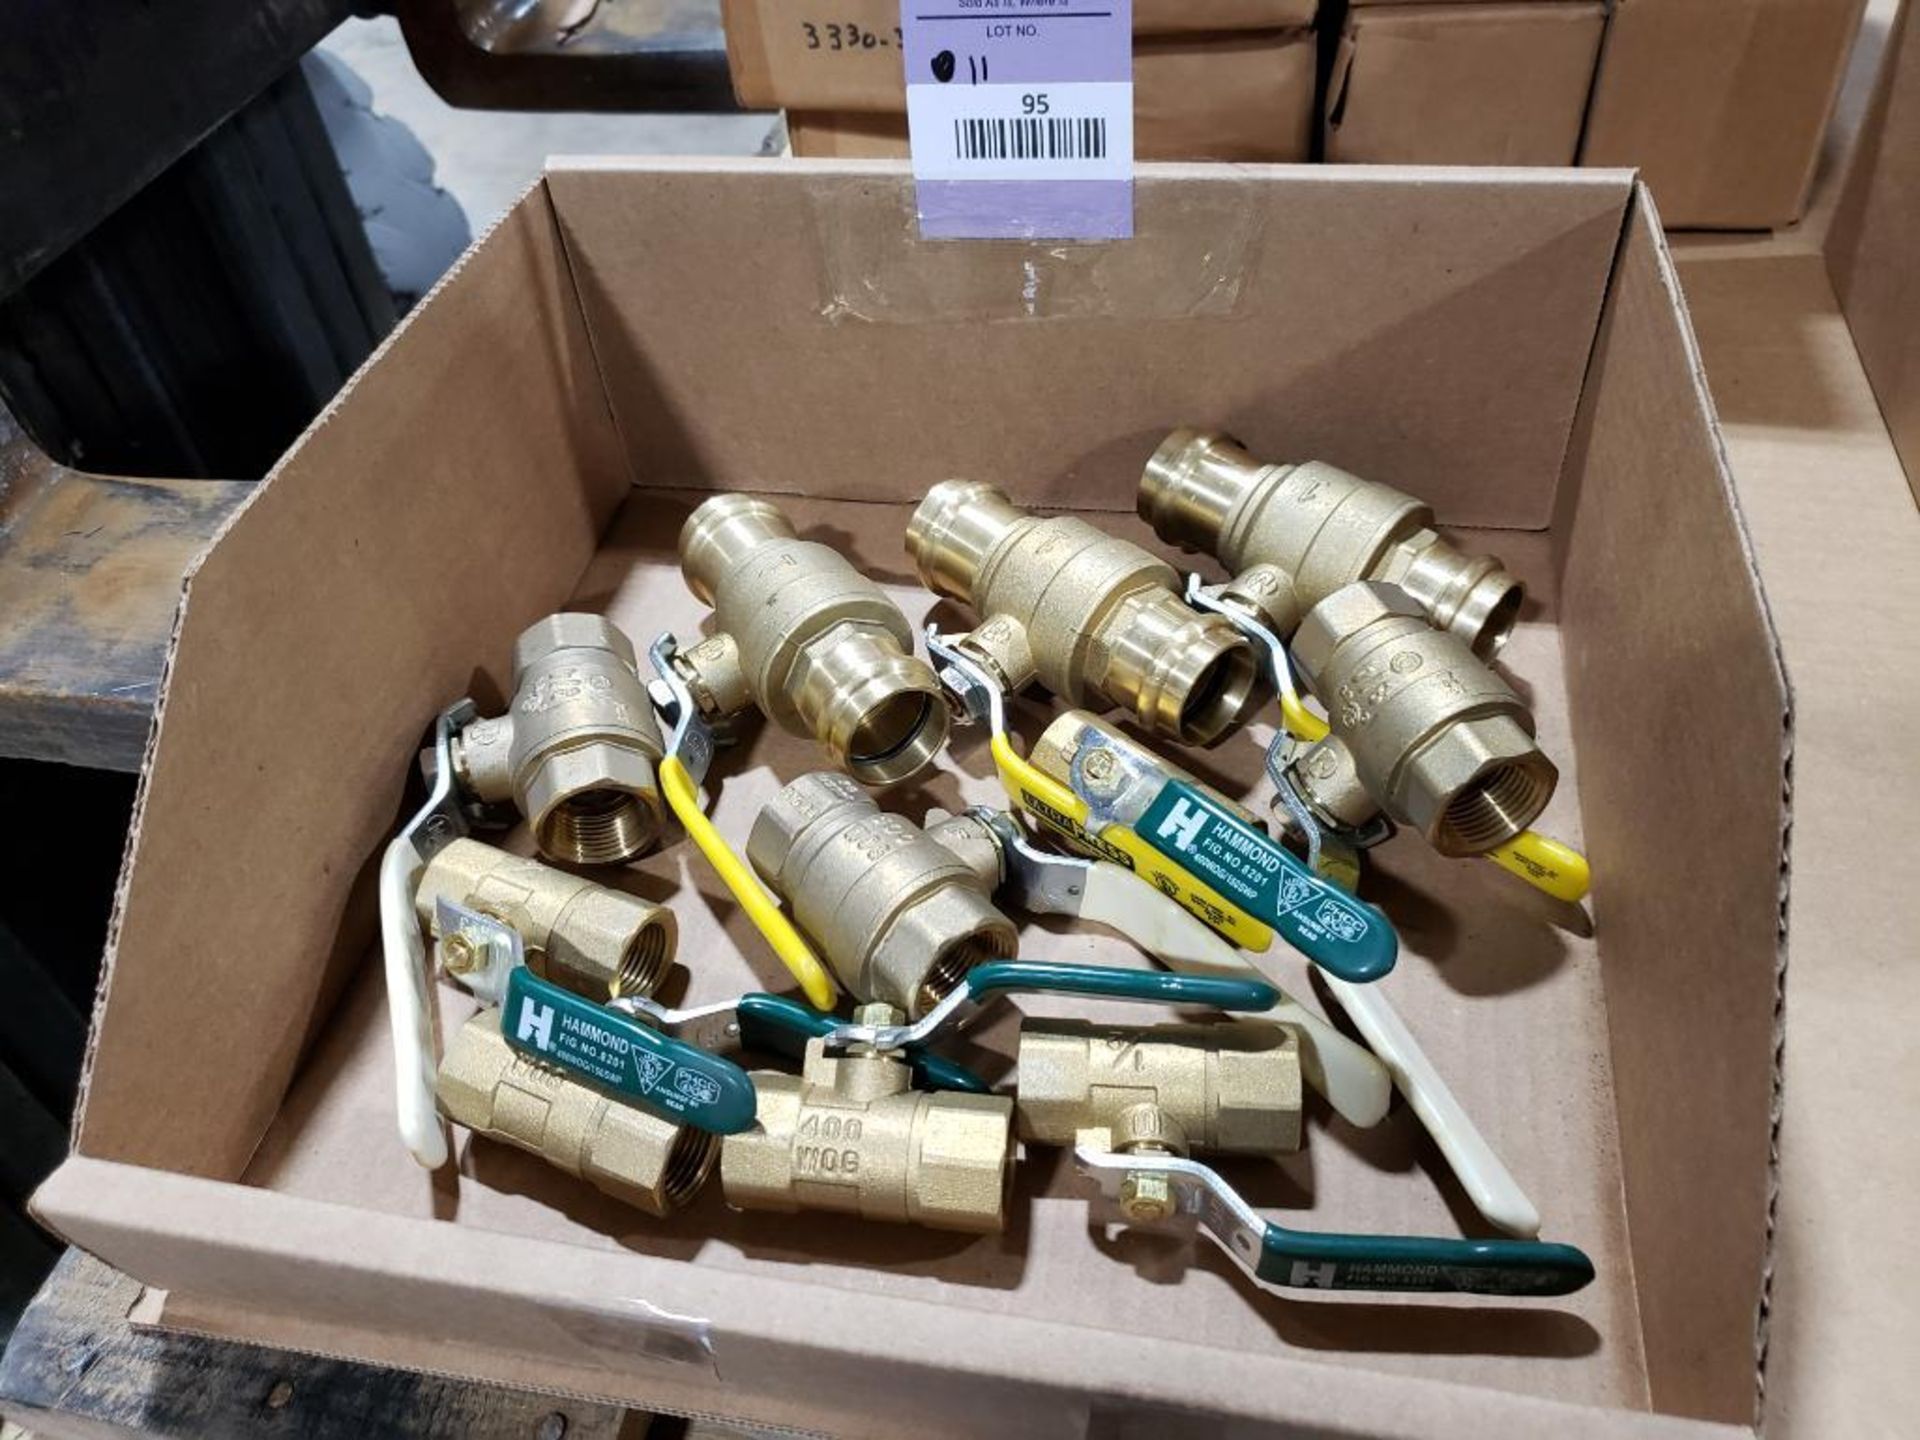 Qty 11 - Assorted brass valves. New as pictured.